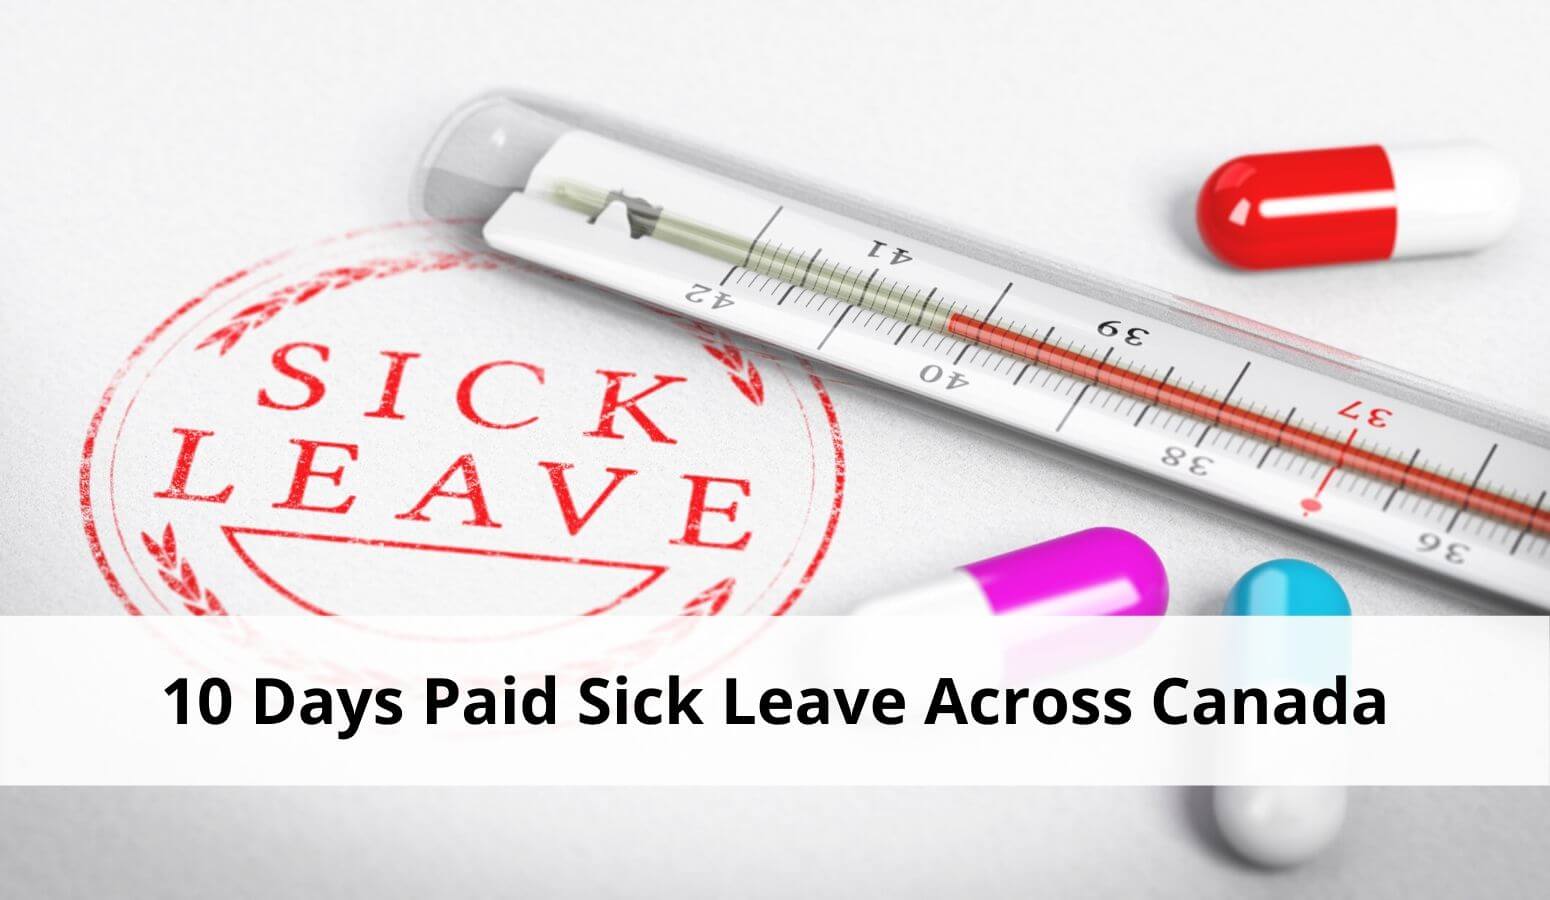 Featured image for “10 Days Paid Sick Leave – COVID-19 Updates”